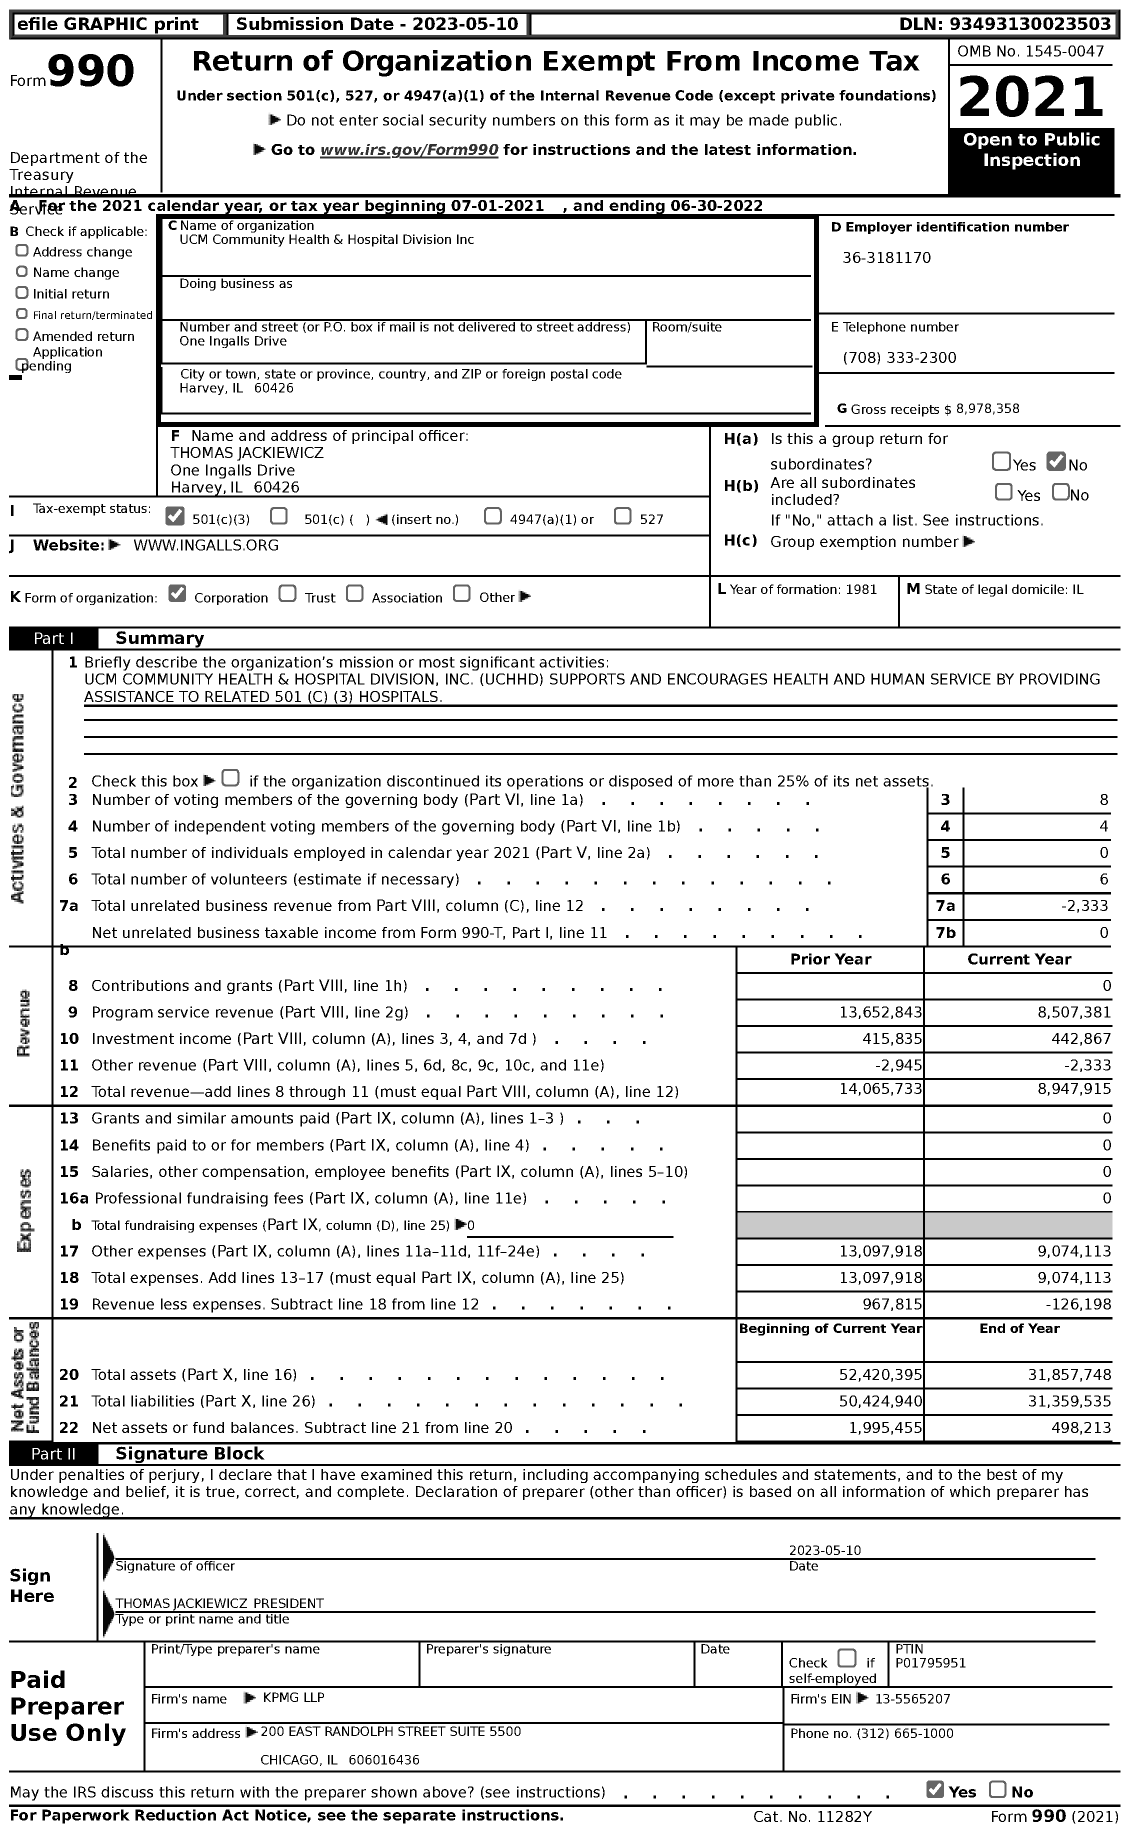 Image of first page of 2021 Form 990 for UCM Community Health and Hospital Division